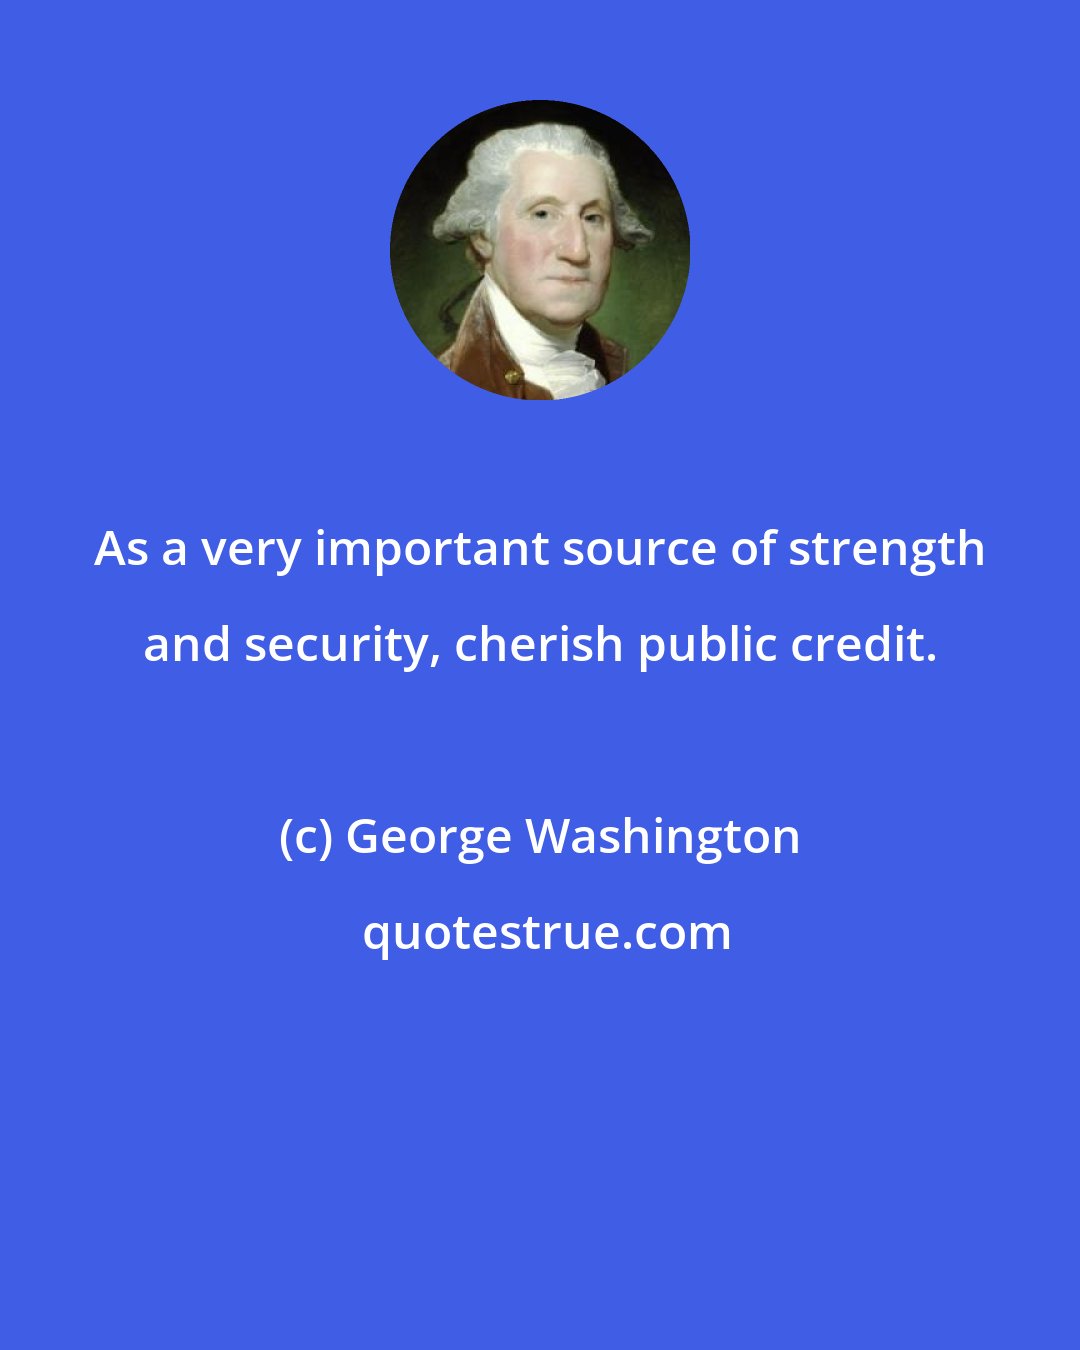 George Washington: As a very important source of strength and security, cherish public credit.